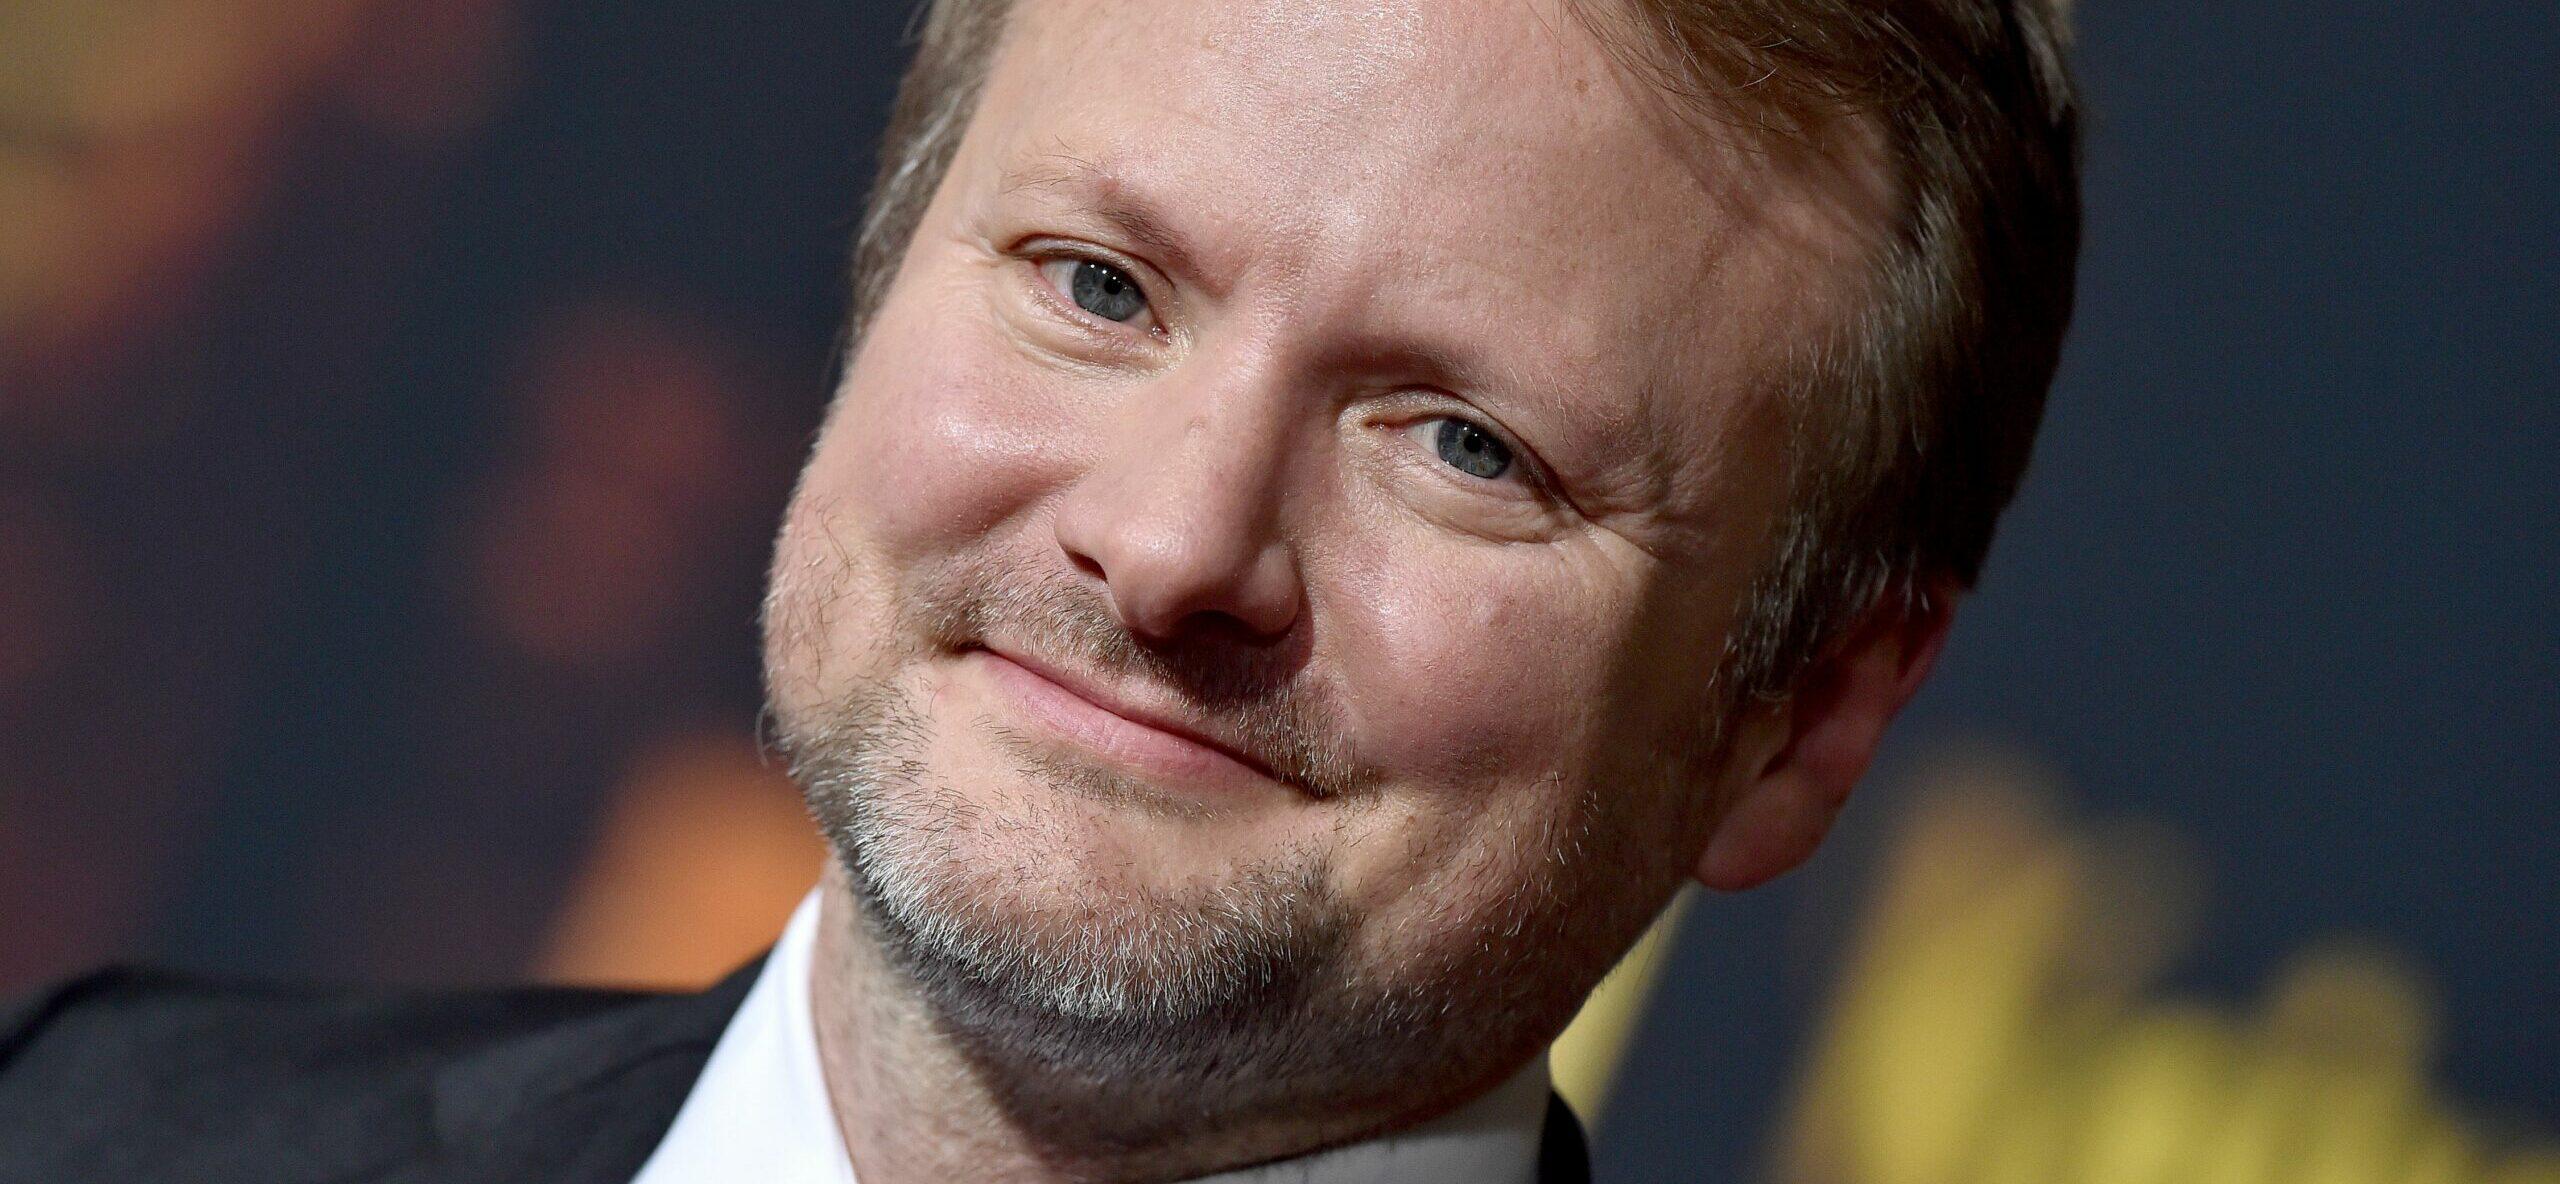 Rian Johnson at the Knives Out Premiere